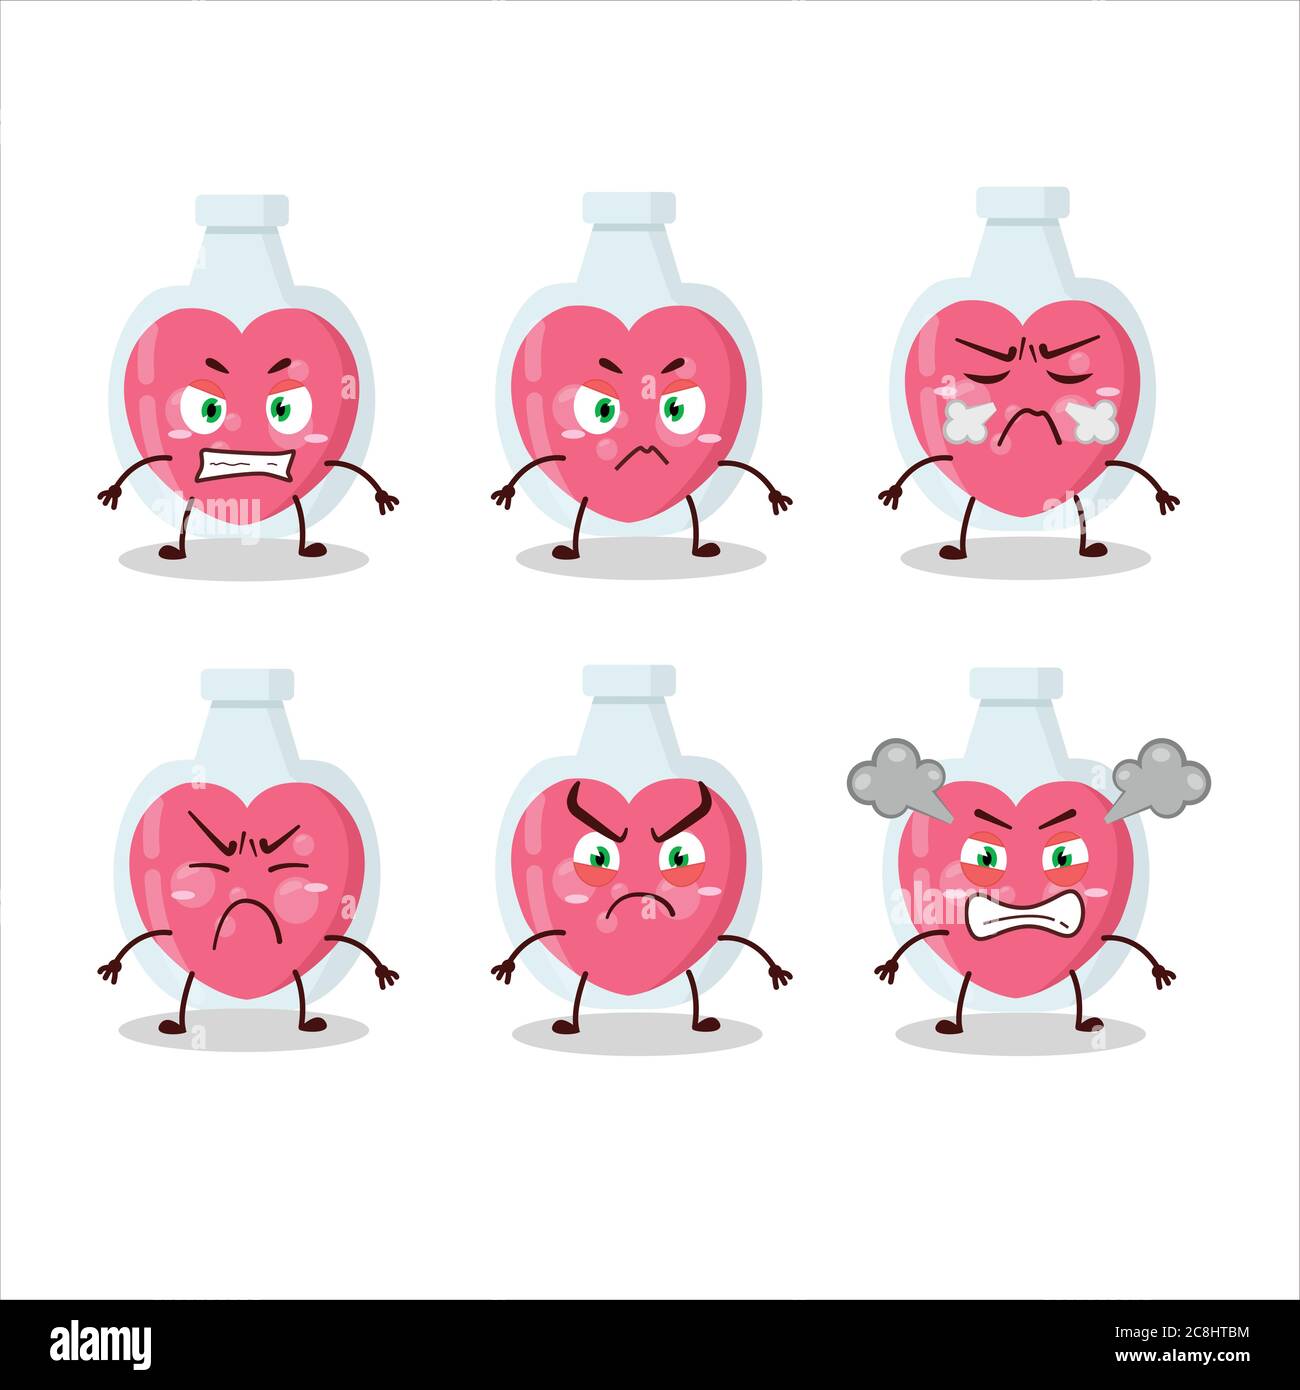 Love potion cartoon character with various angry expressions Stock Vector